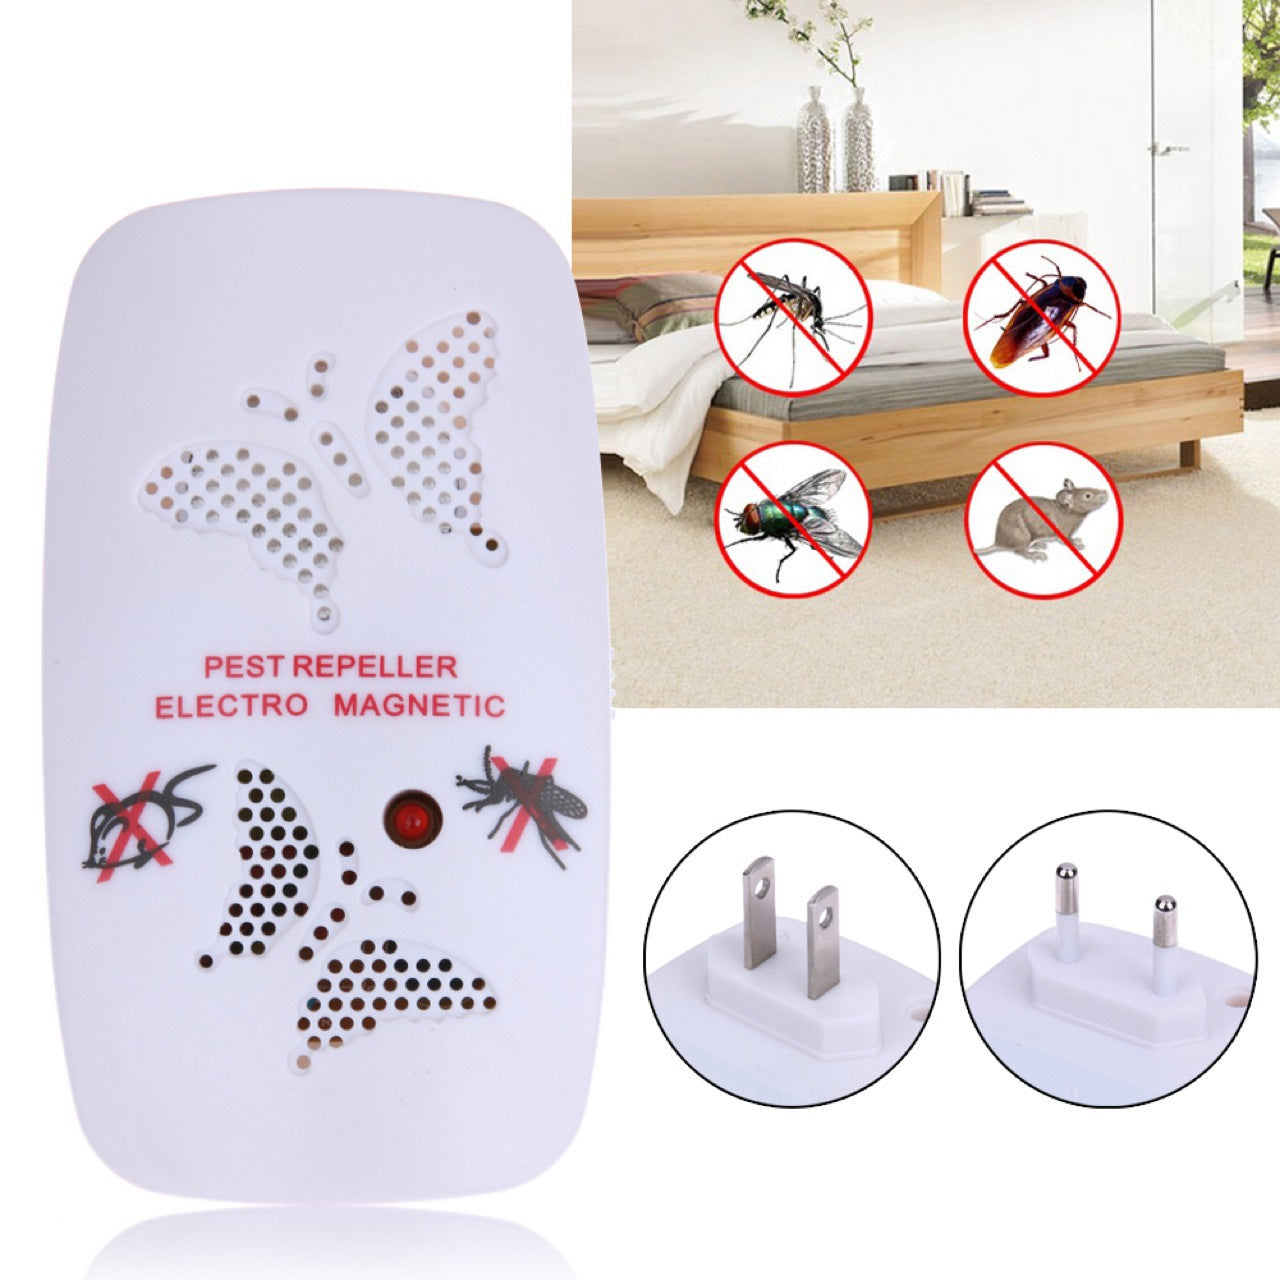 New Home Electronic Ultrasonic Pest Repeller Anti Mosquito Ants Spiders Roaches Repelling Electro Repeller Magnetic - ebowsos